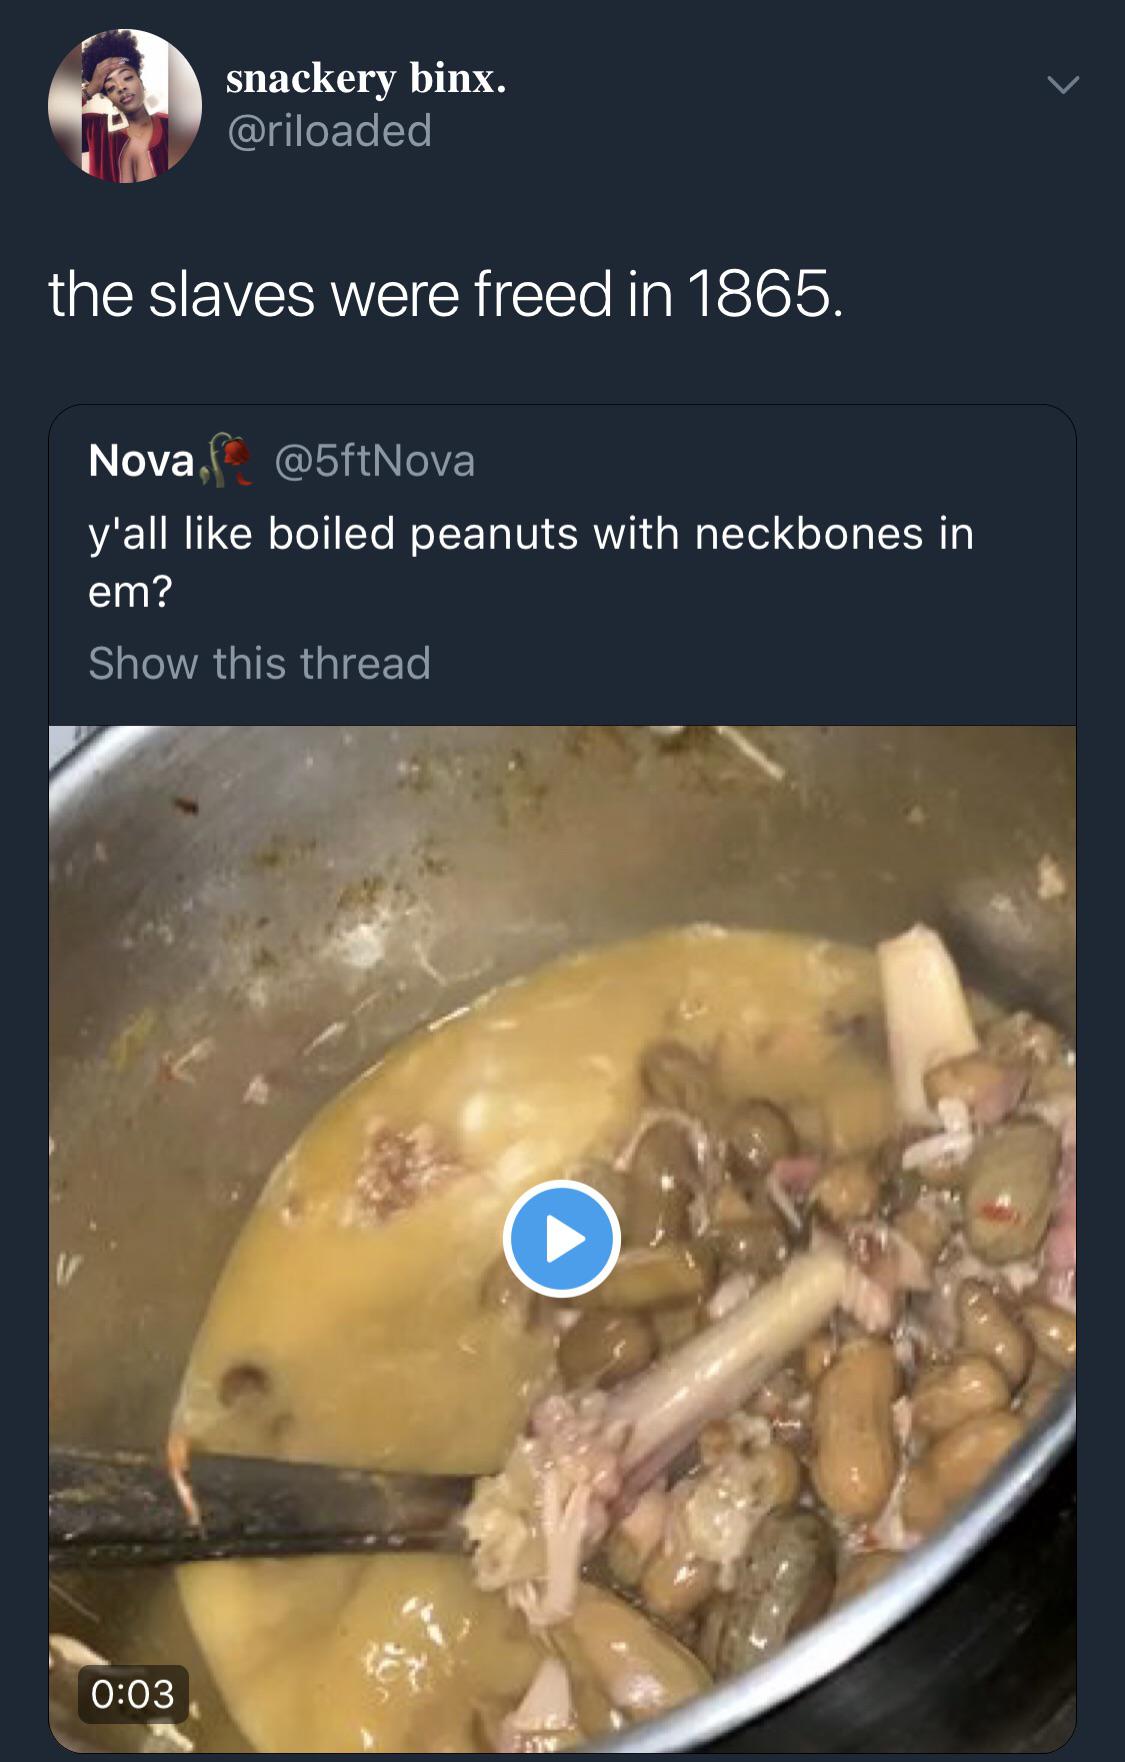 black twitter - snackery binx. the slaves were freed in 1865. Nova y'all boiled peanuts with neckbones in em? Show this thread,